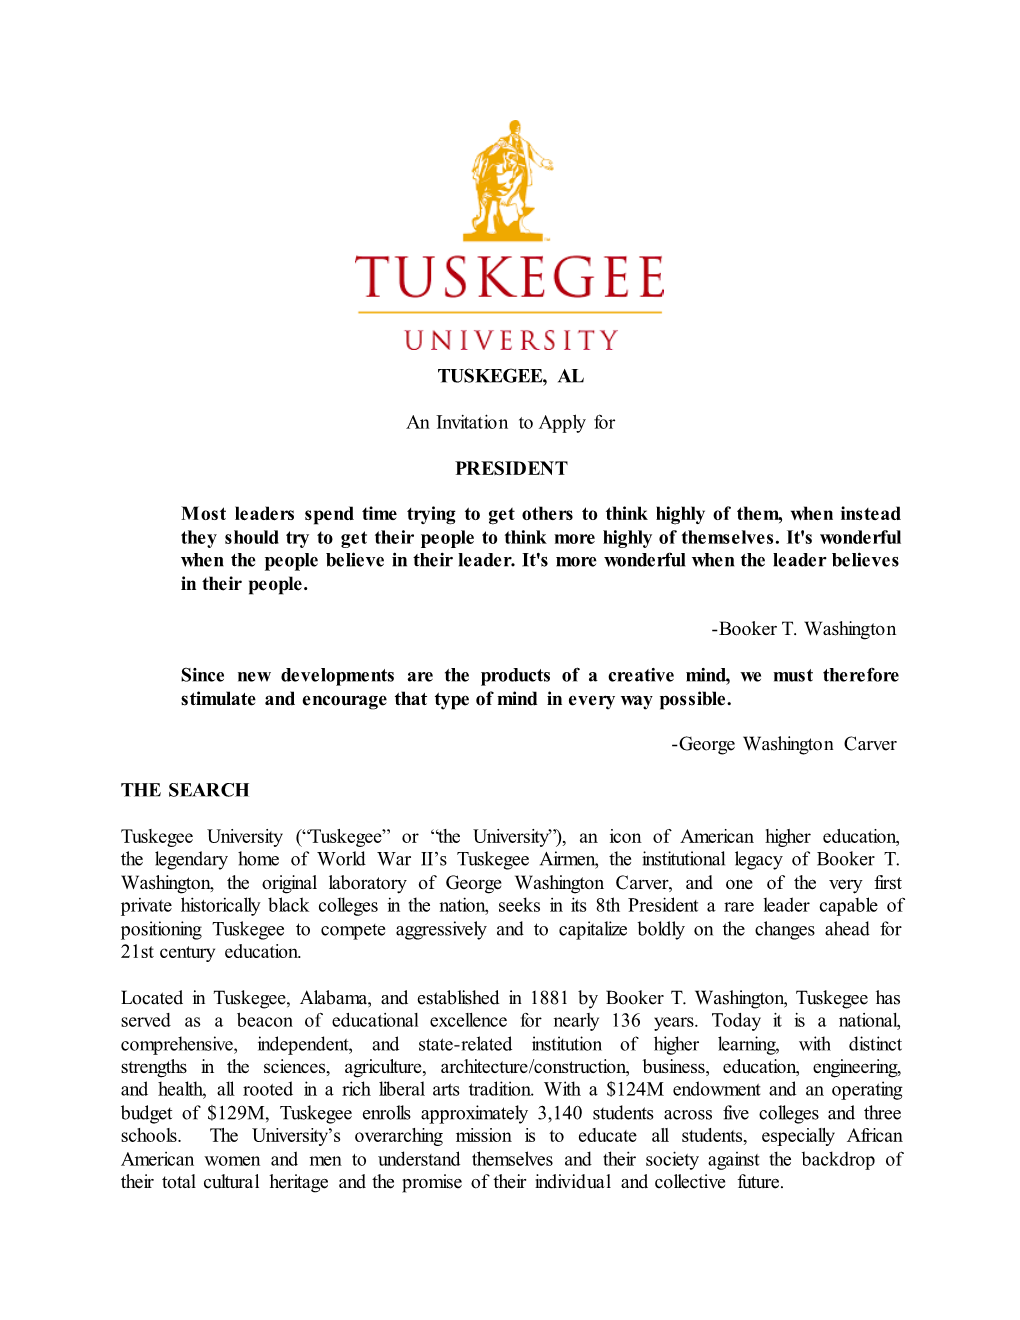 TUSKEGEE, AL an Invitation to Apply for PRESIDENT Most Leaders